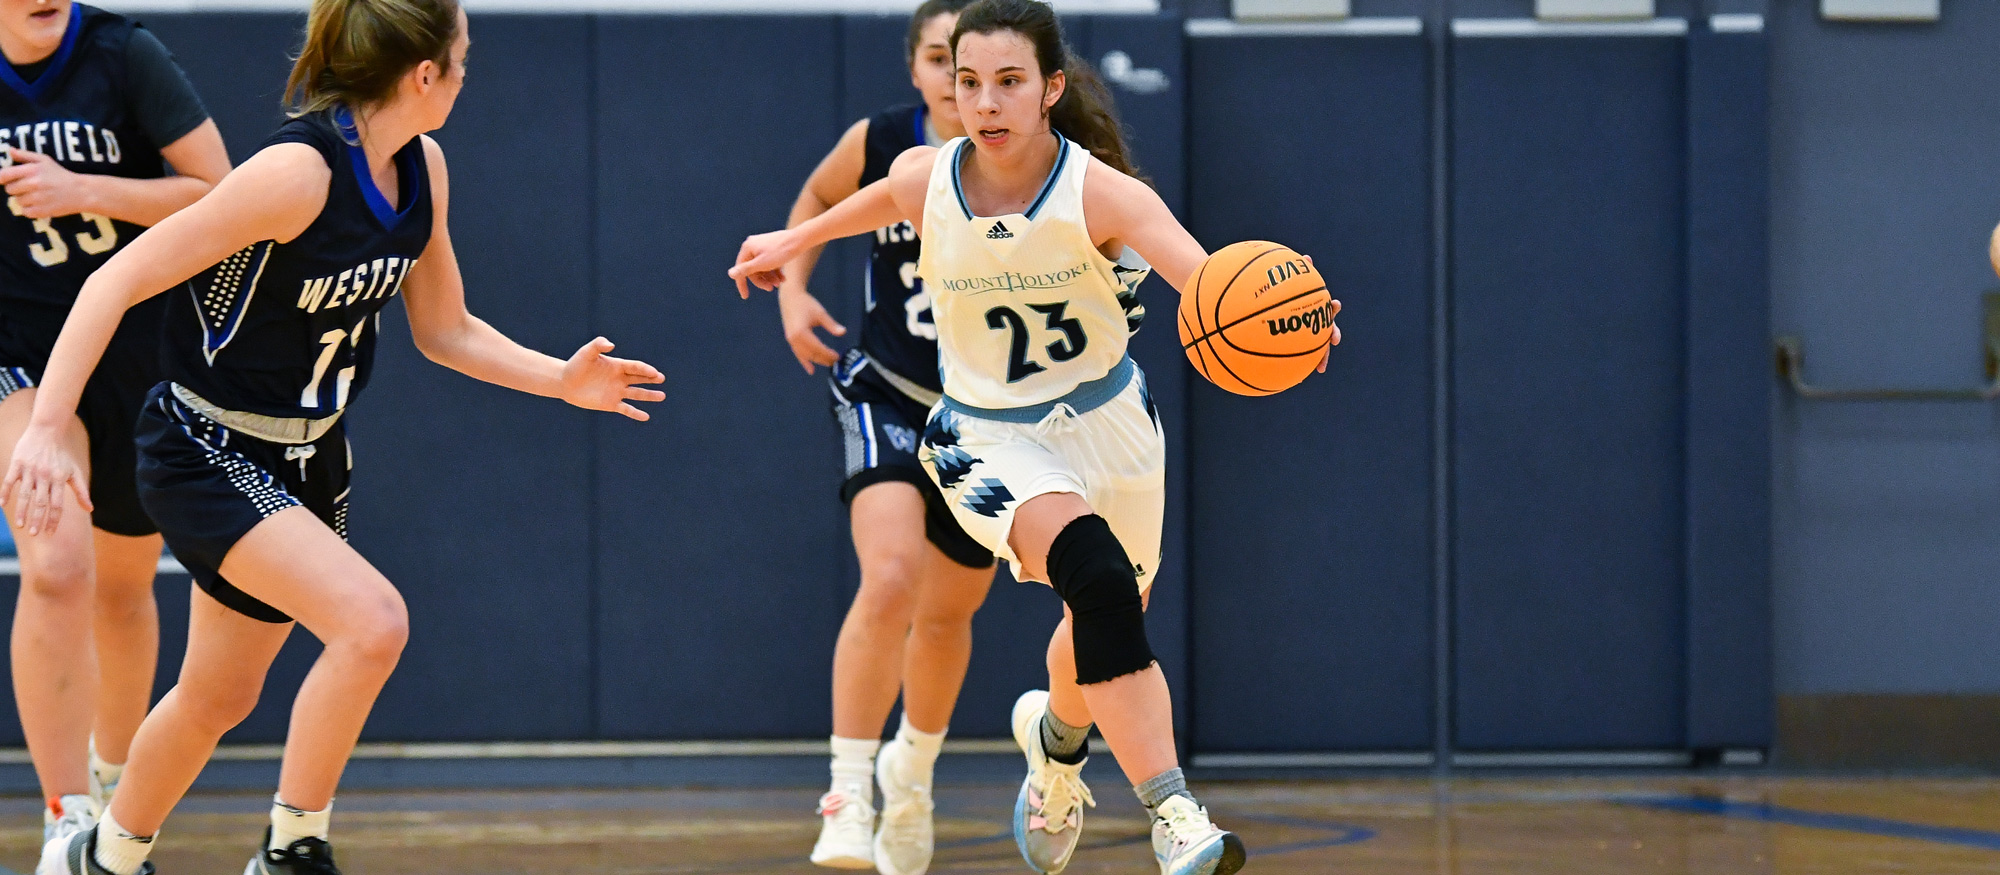 Alex Twomey scored a game-high 17 points and added nine rebounds and five steals in Mount Holyoke's loss at New England College on Dec. 3, 2022. (RJB Sports file photo)